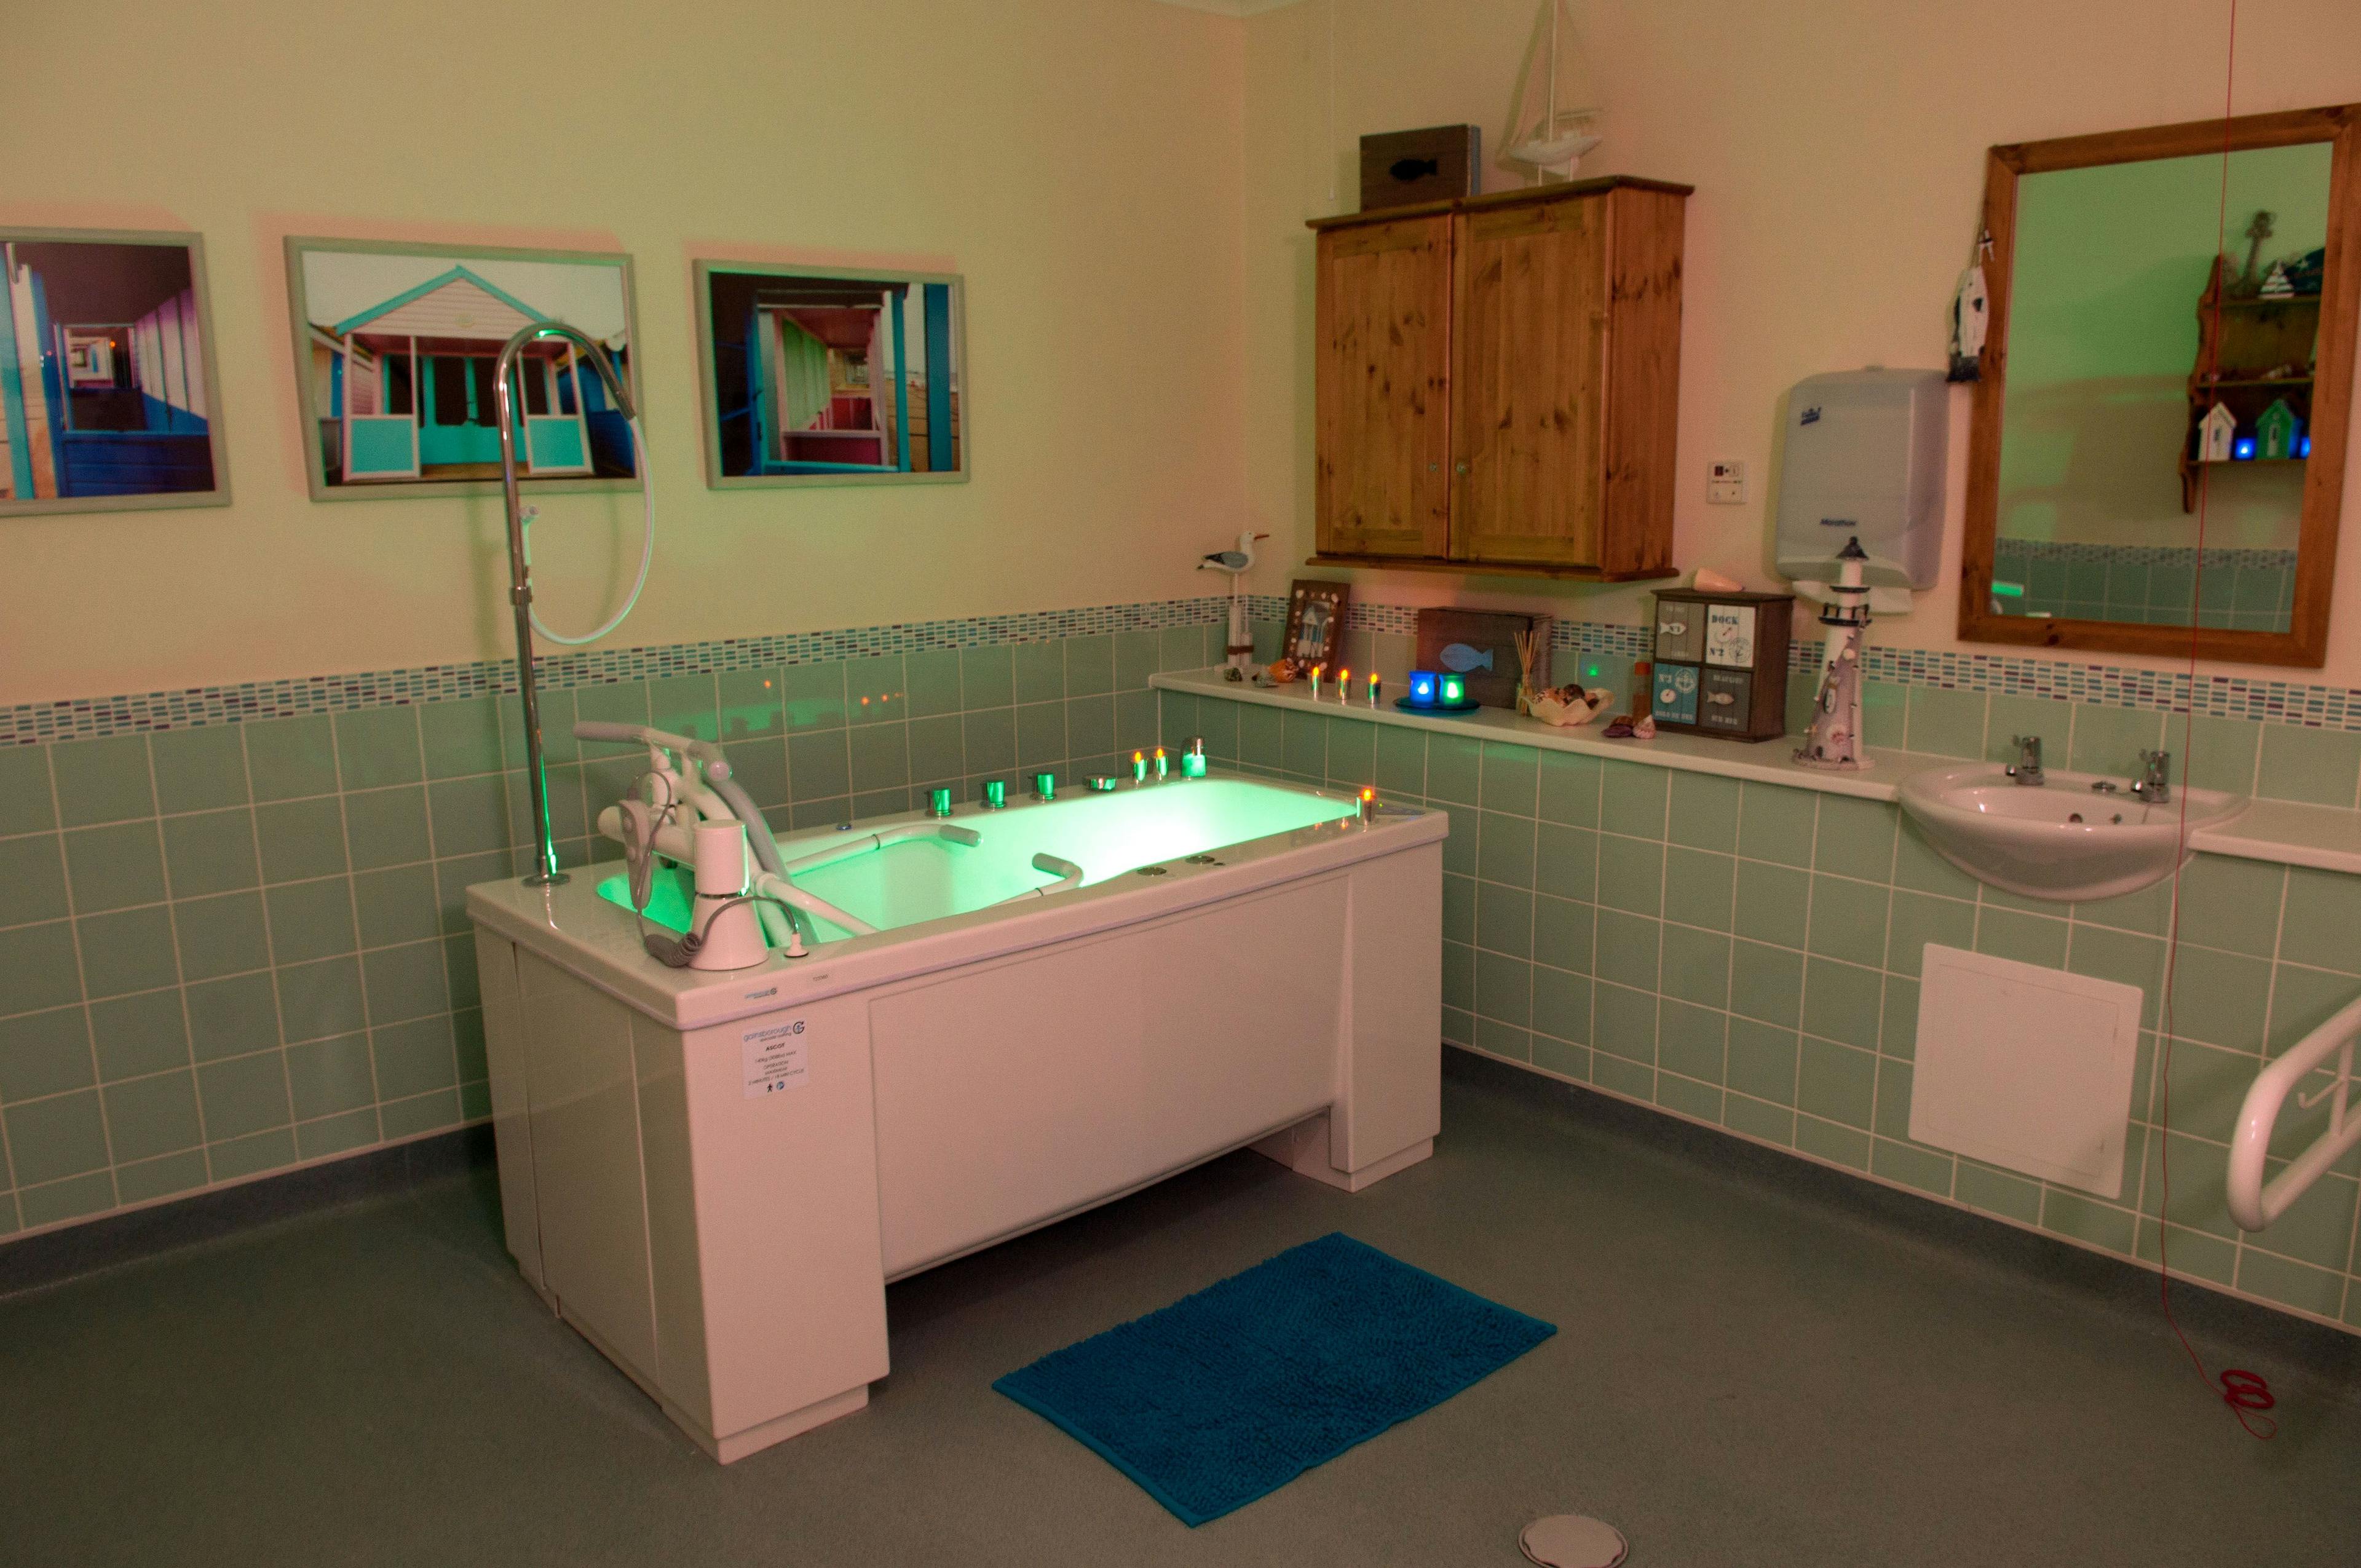 Spa Bathroom at Ritson Lodge Care Home in Gorleston-on-Sea, Great Yarmouth